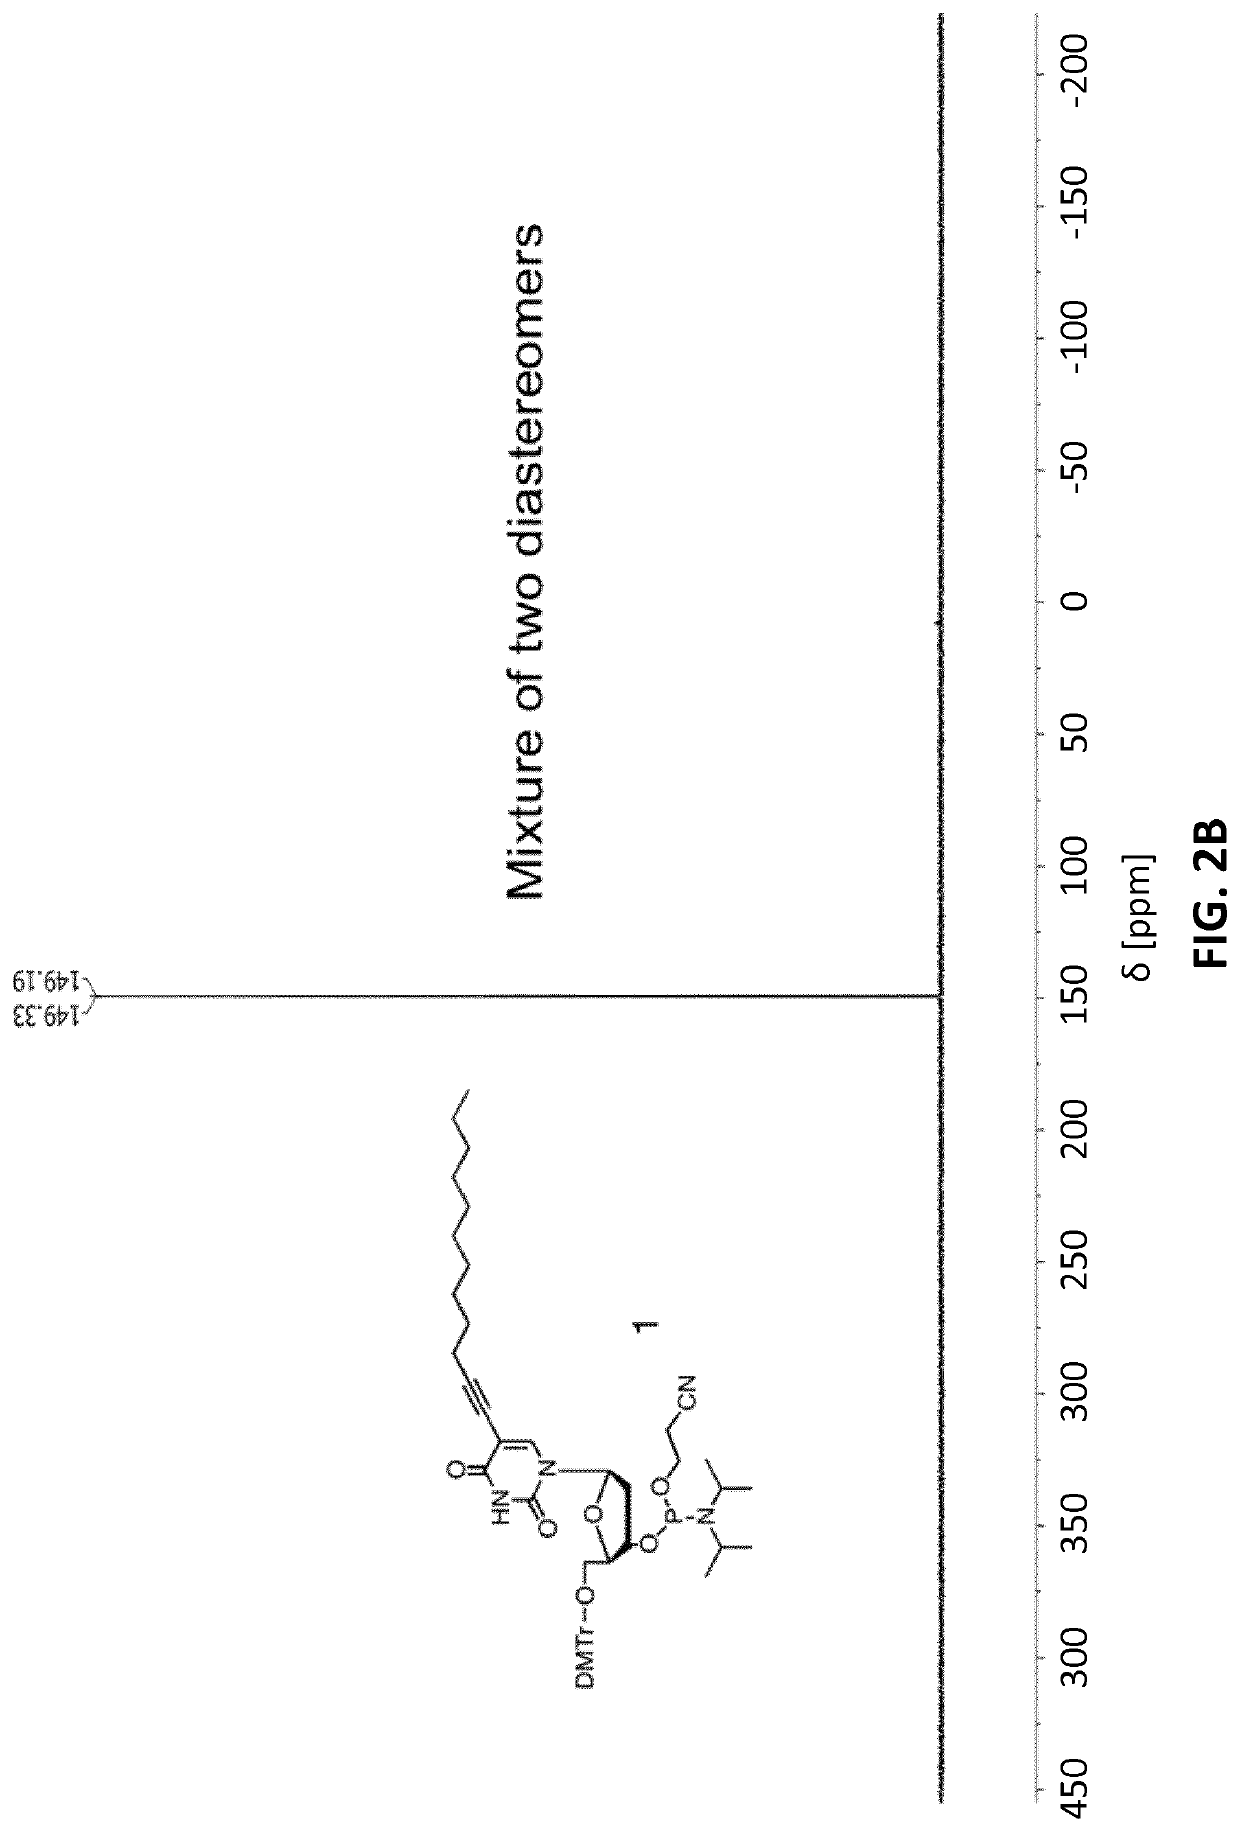 Nucleic acid-based assembly and uses thereof